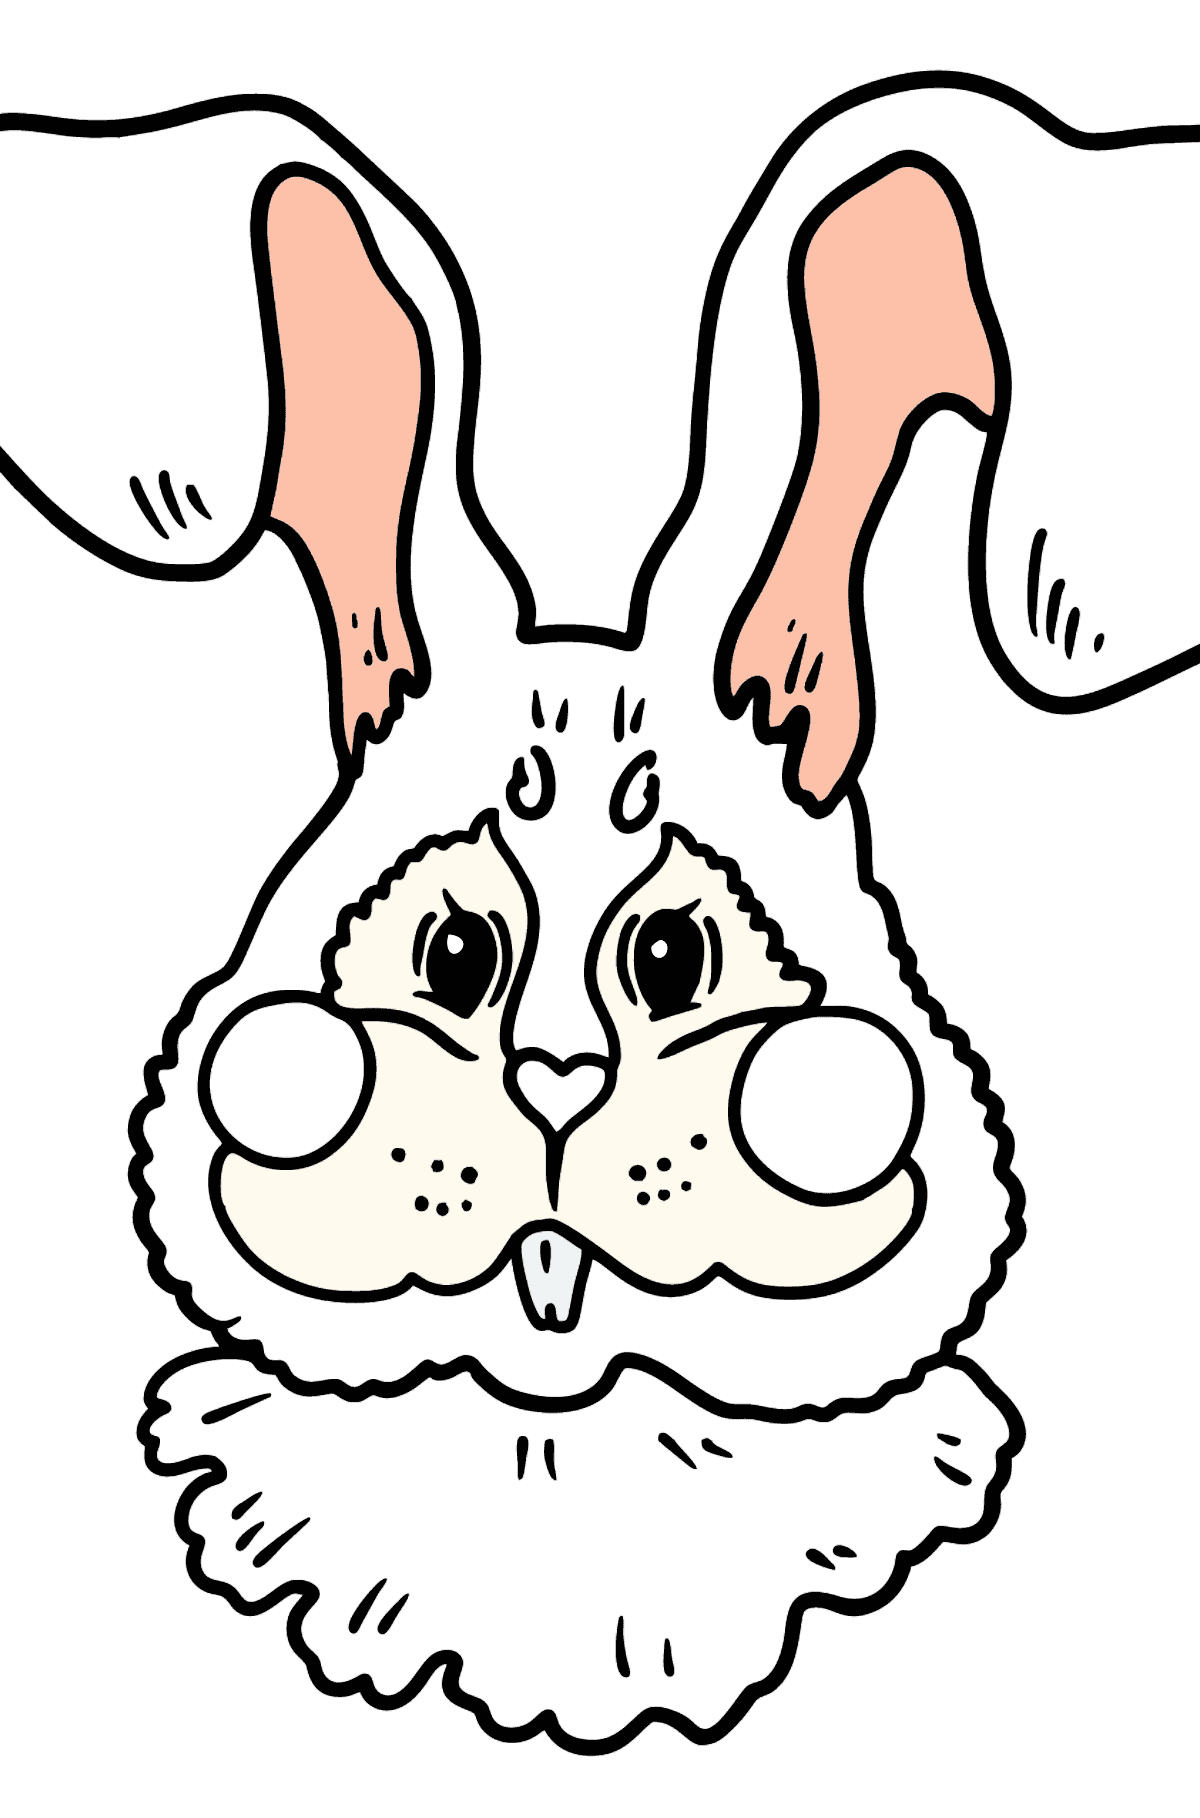 Bunny Face coloring page - Coloring Pages for Kids